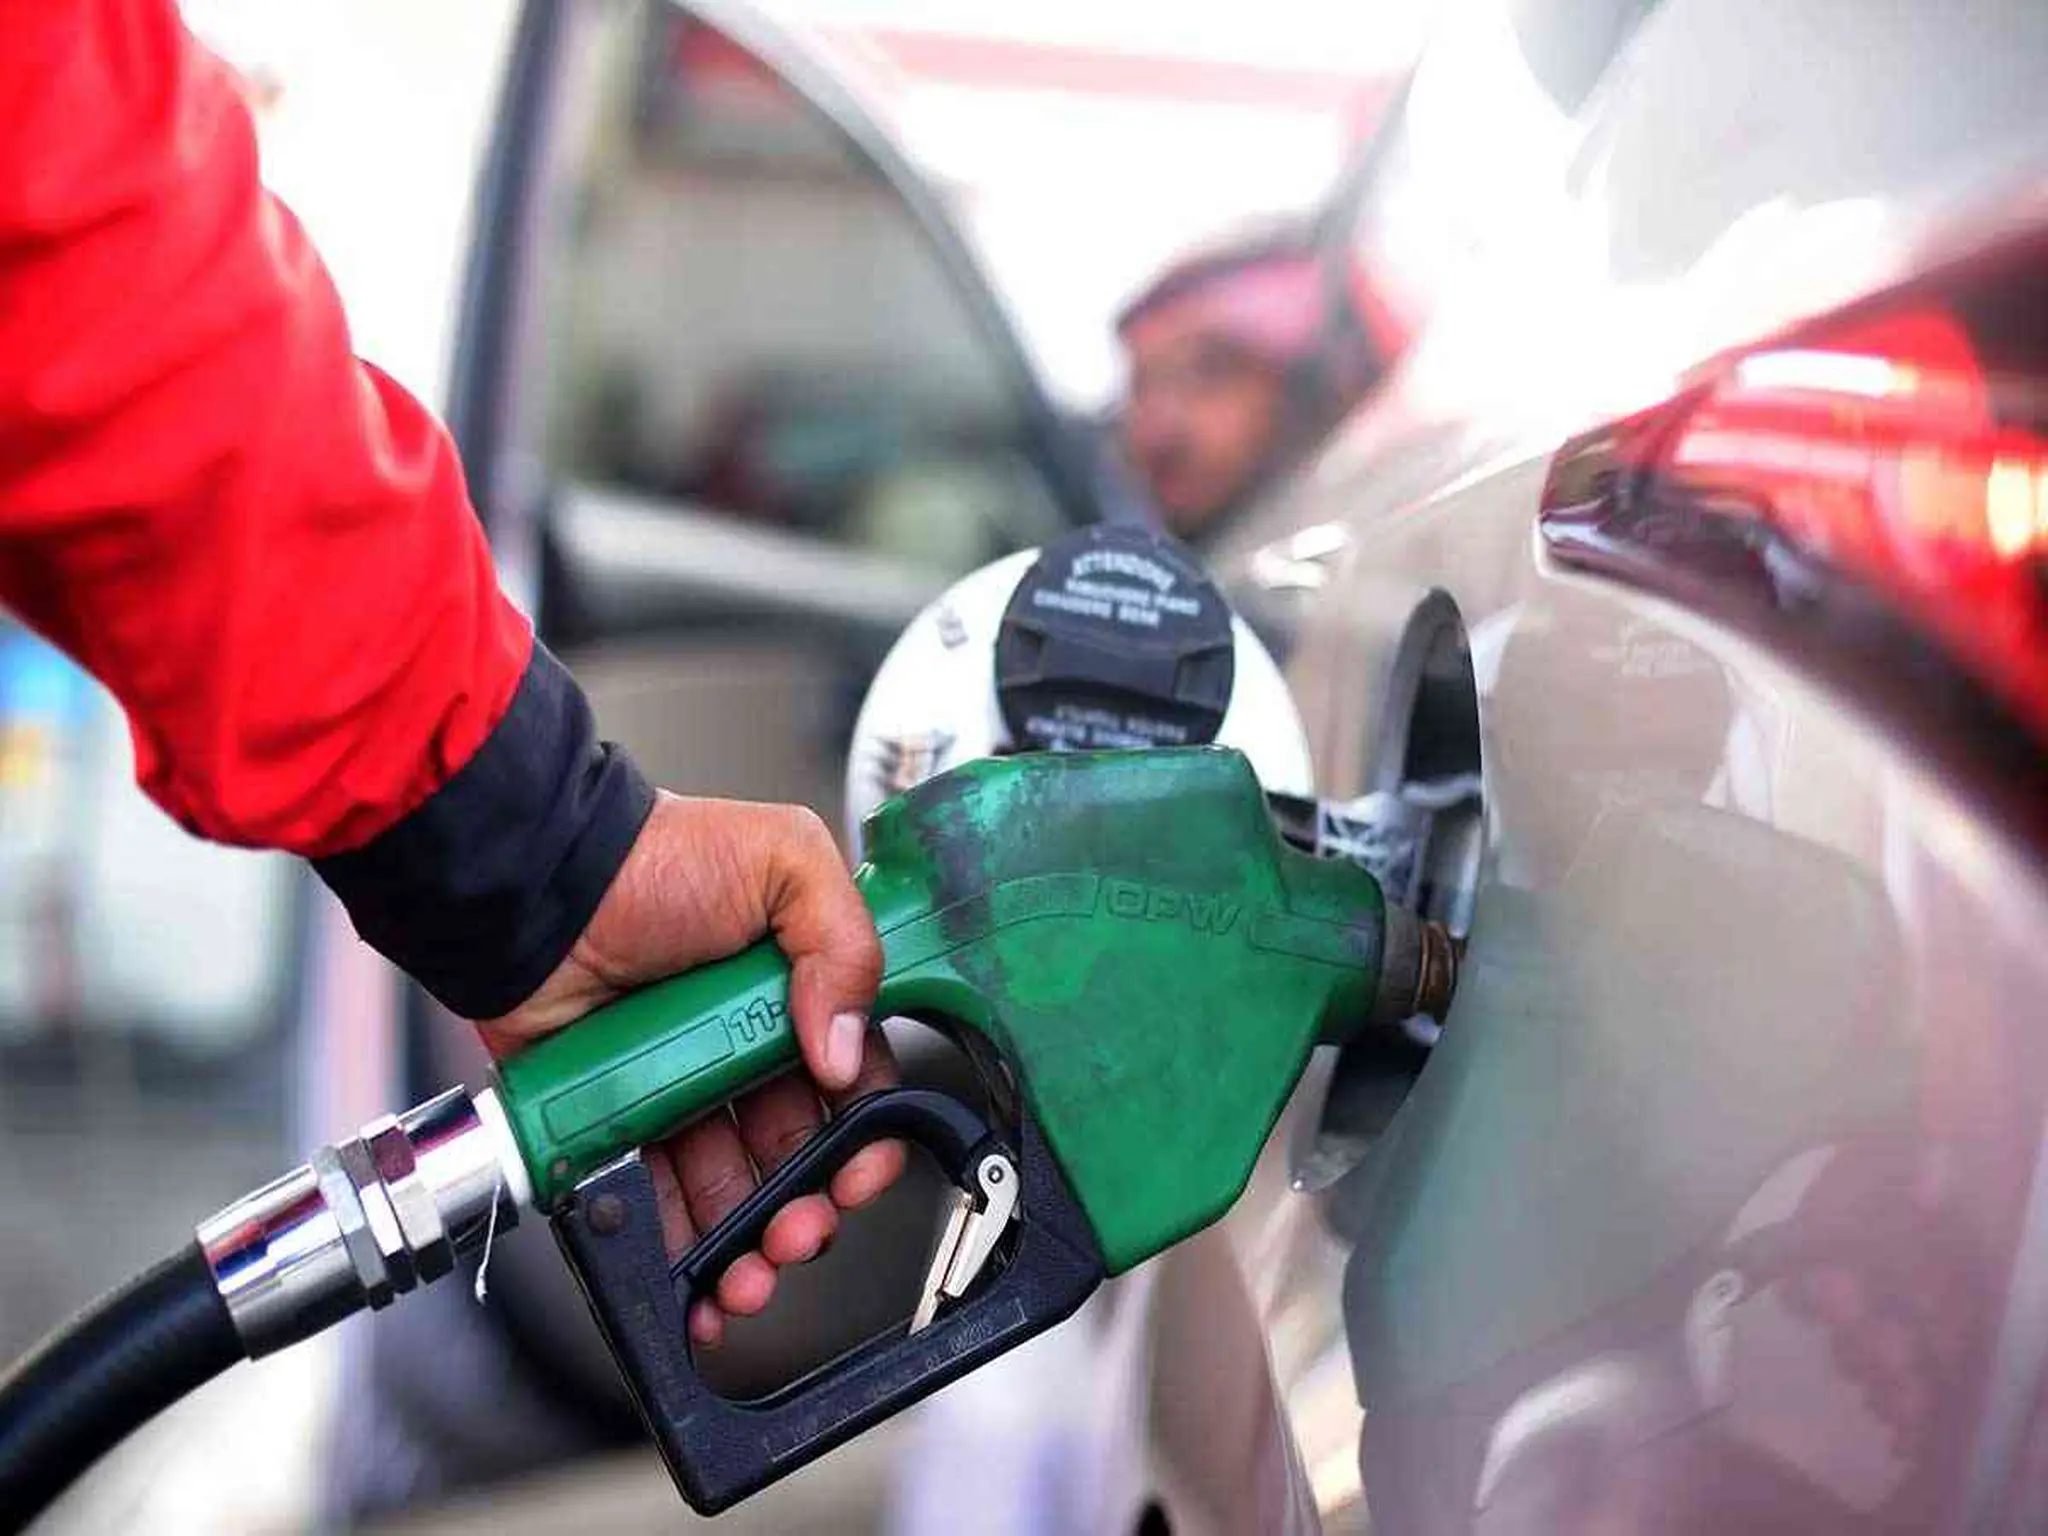 Will gasoline prices be raised in the UAE or not? And the announcement date